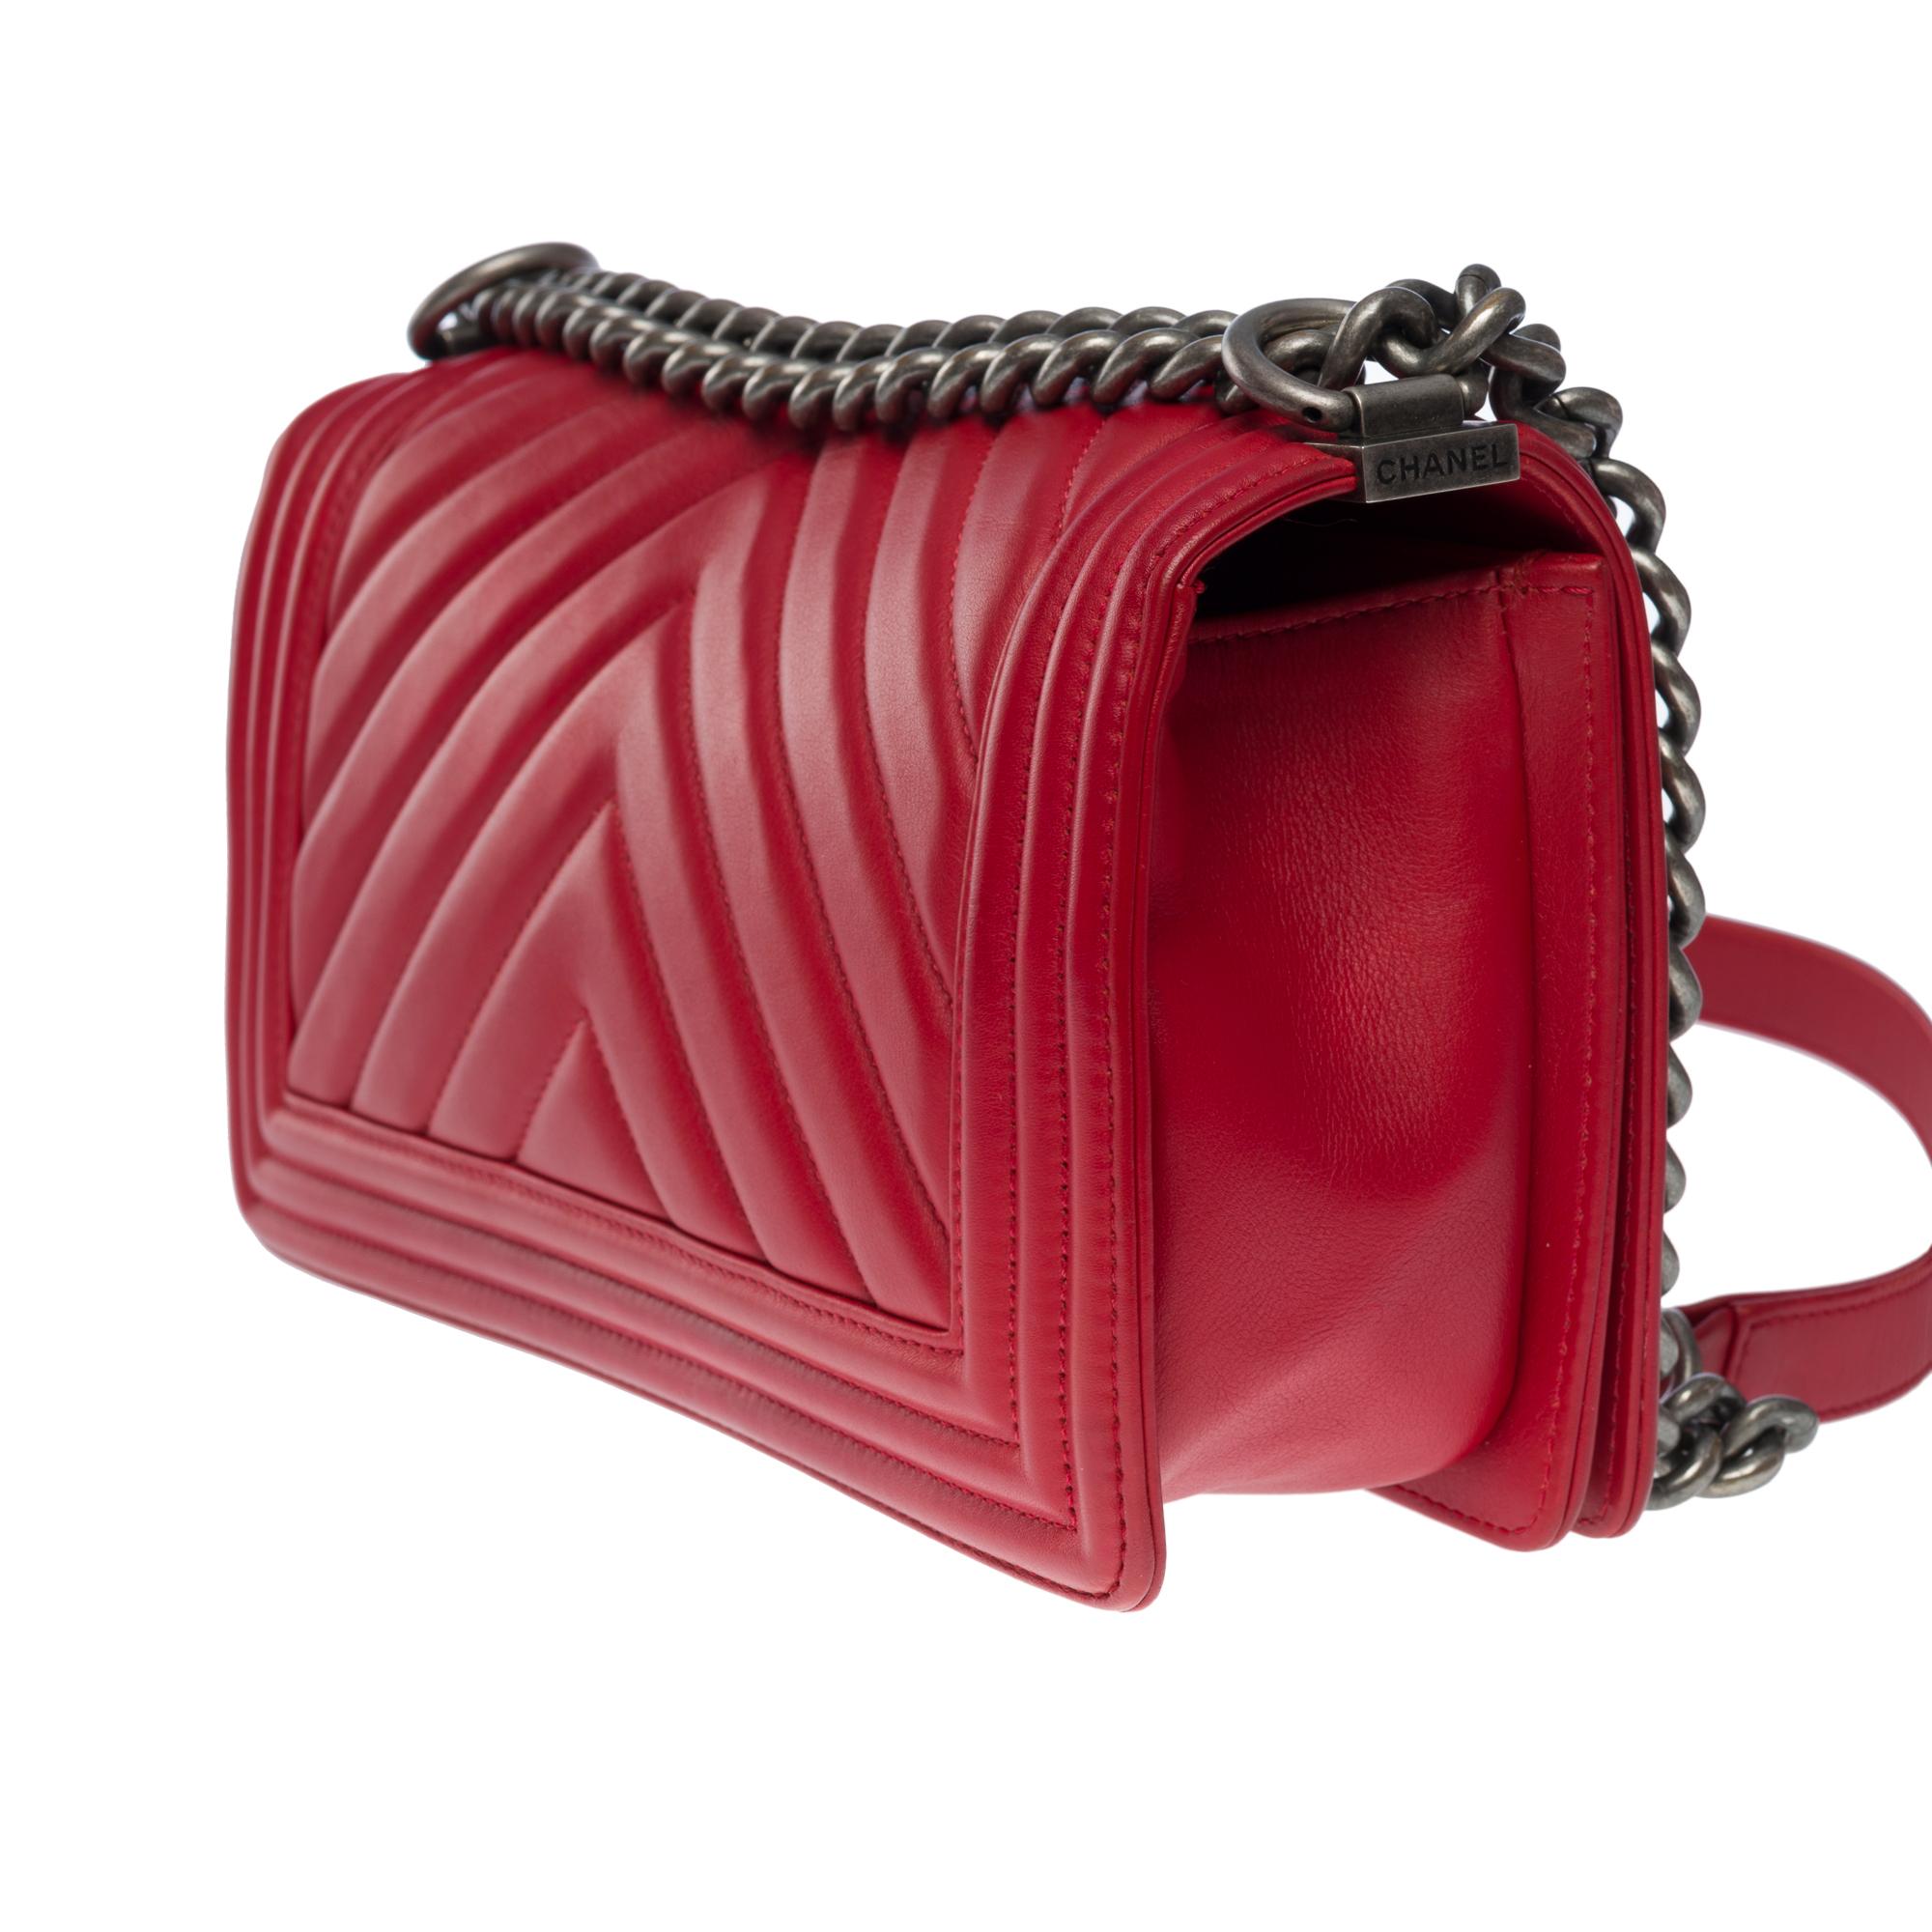 Chanel Boy Old Medium shoulder bag in red quilted herringbone leather, SHW For Sale 1